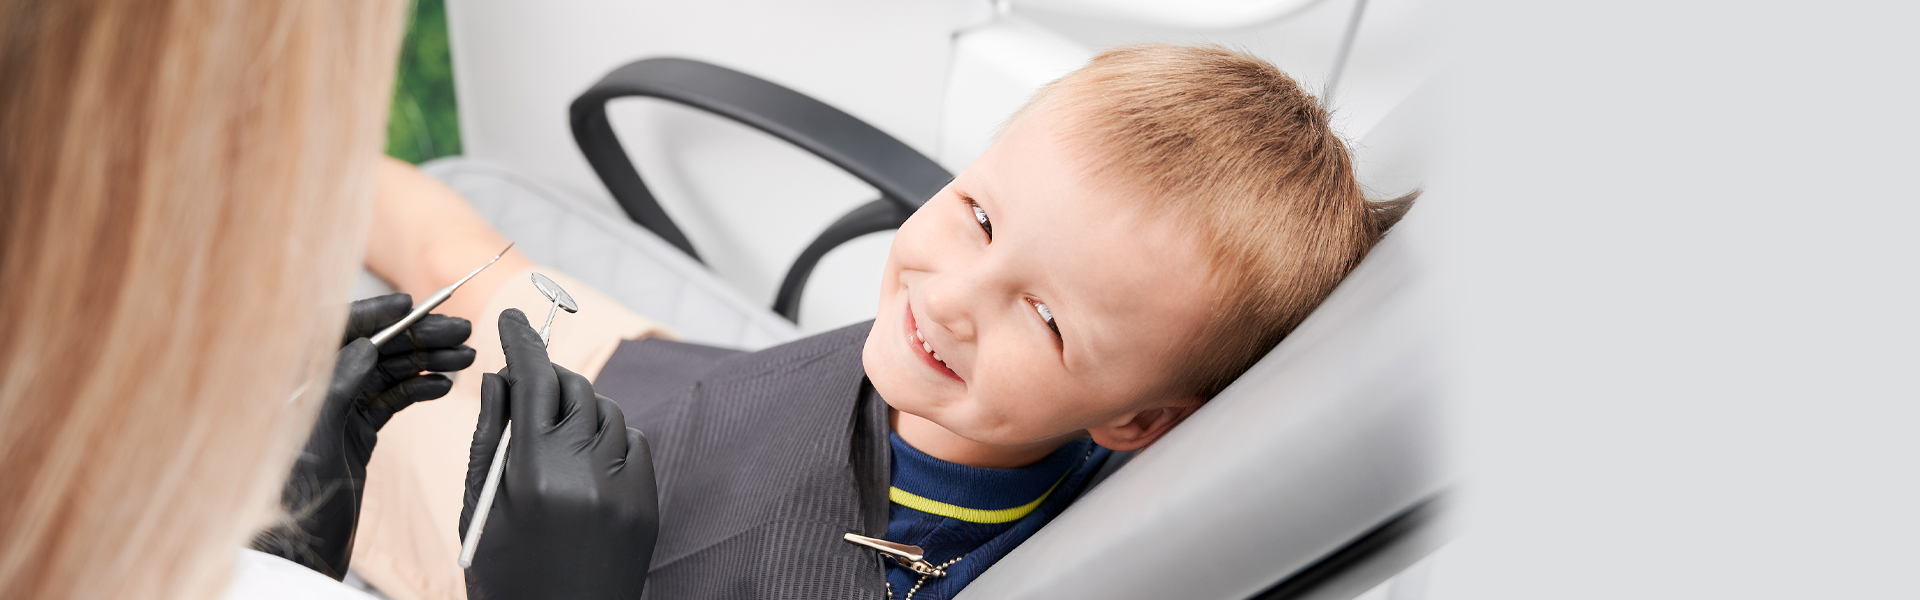 5 Simple Tips to Prep Your Child’s Teeth for the Fall Season